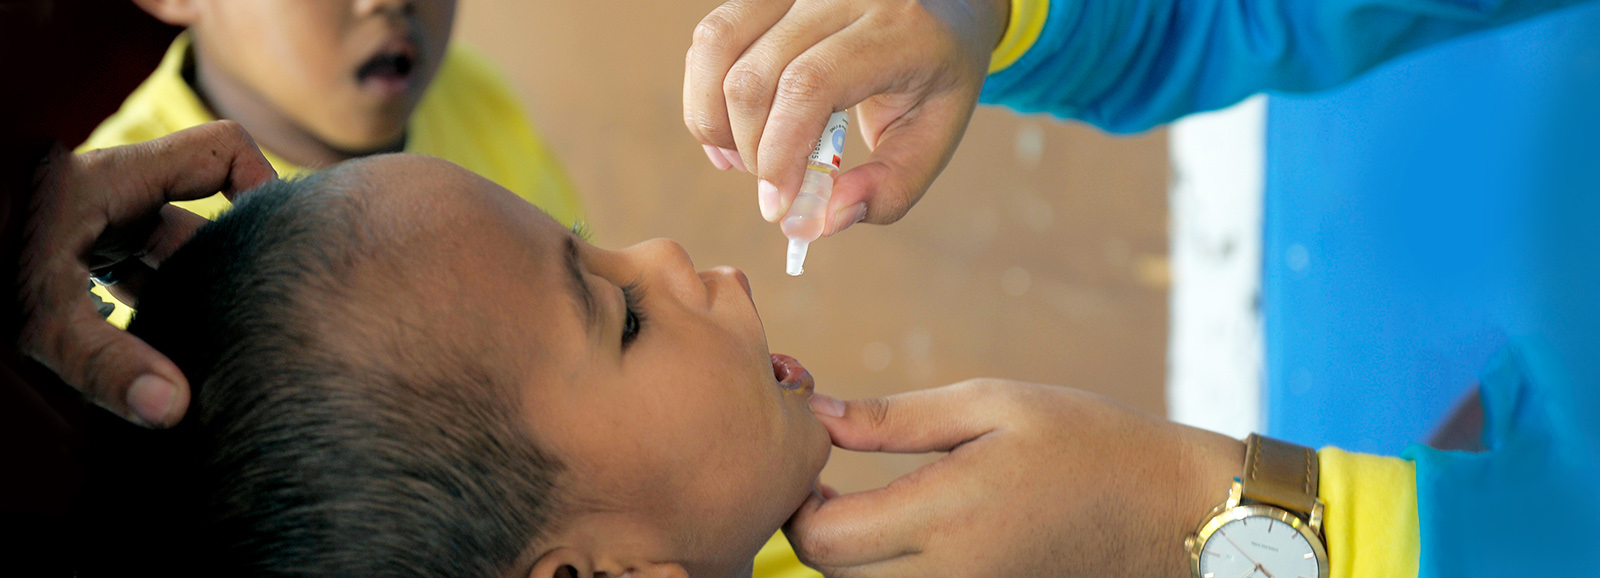 A child receiving oral polio drops (Image © Pacific Press/Getty Images)